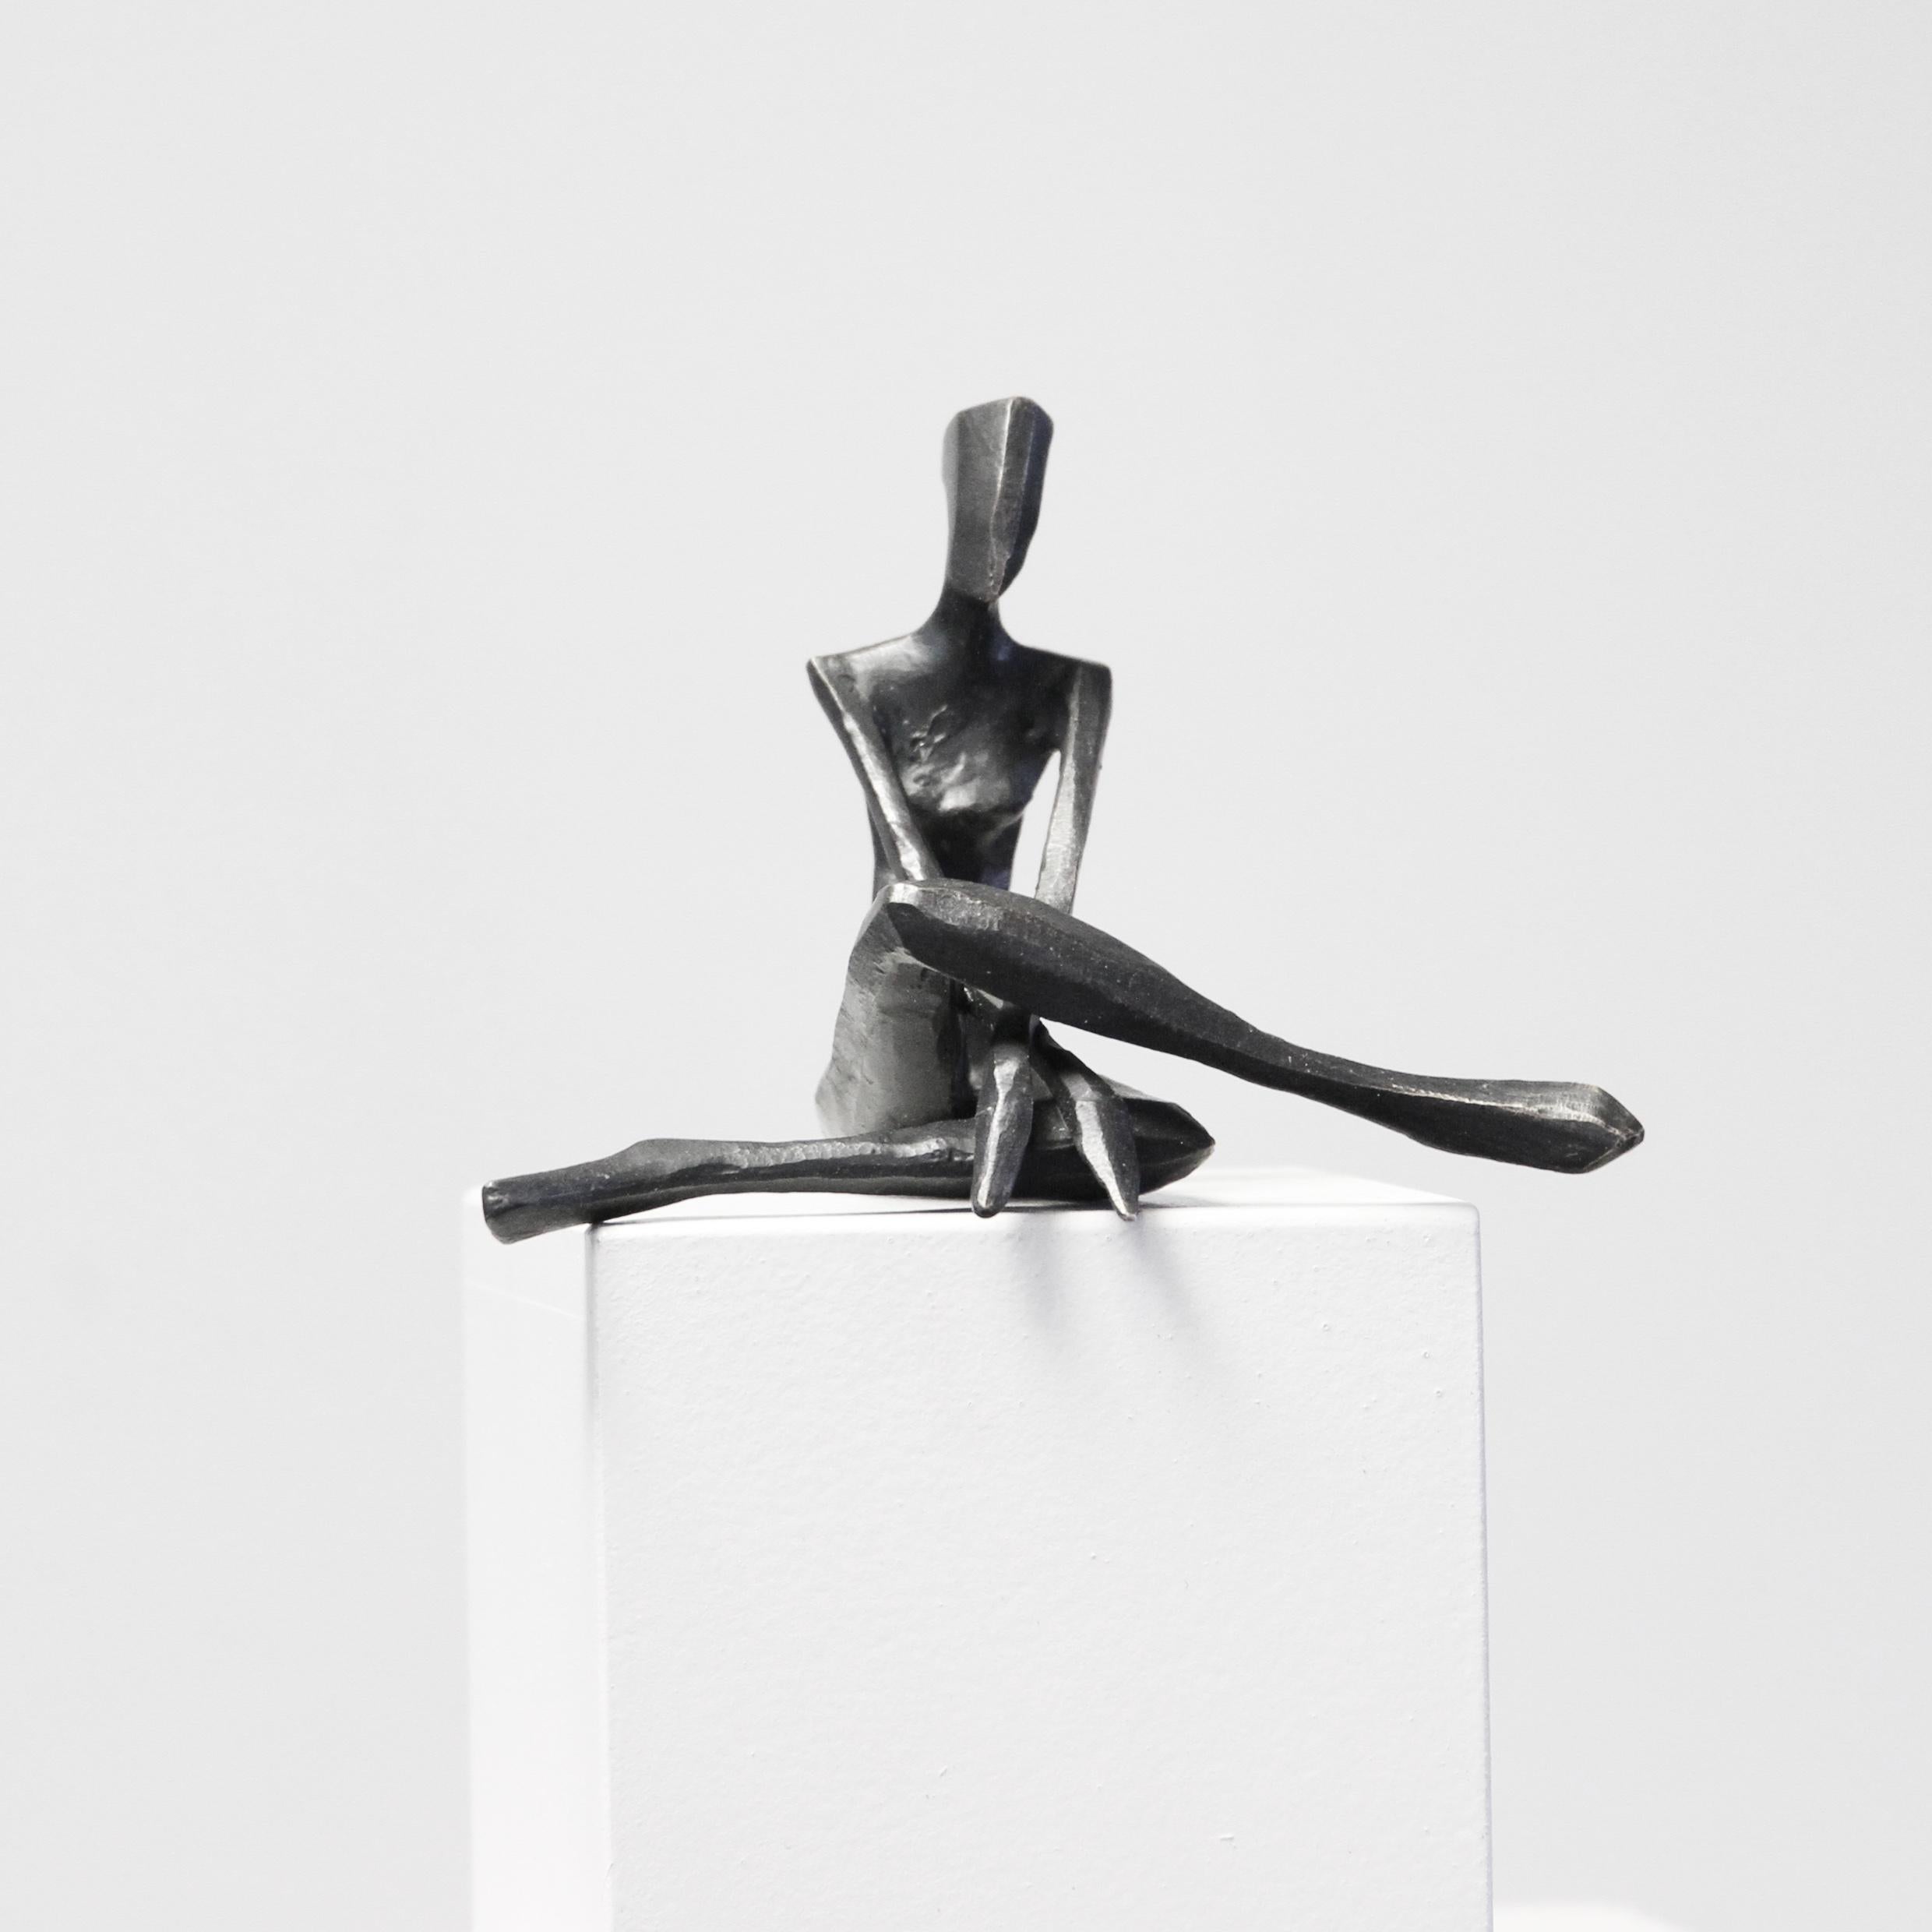 Ruby is a figurative bronze sculpture in a relaxed pose by Nando Kallweit.

Modelled on modern youthful postures but with a nod to the importance of heritage through the stylised Egyptian-influenced head. A lovely piece on its own or with a group of